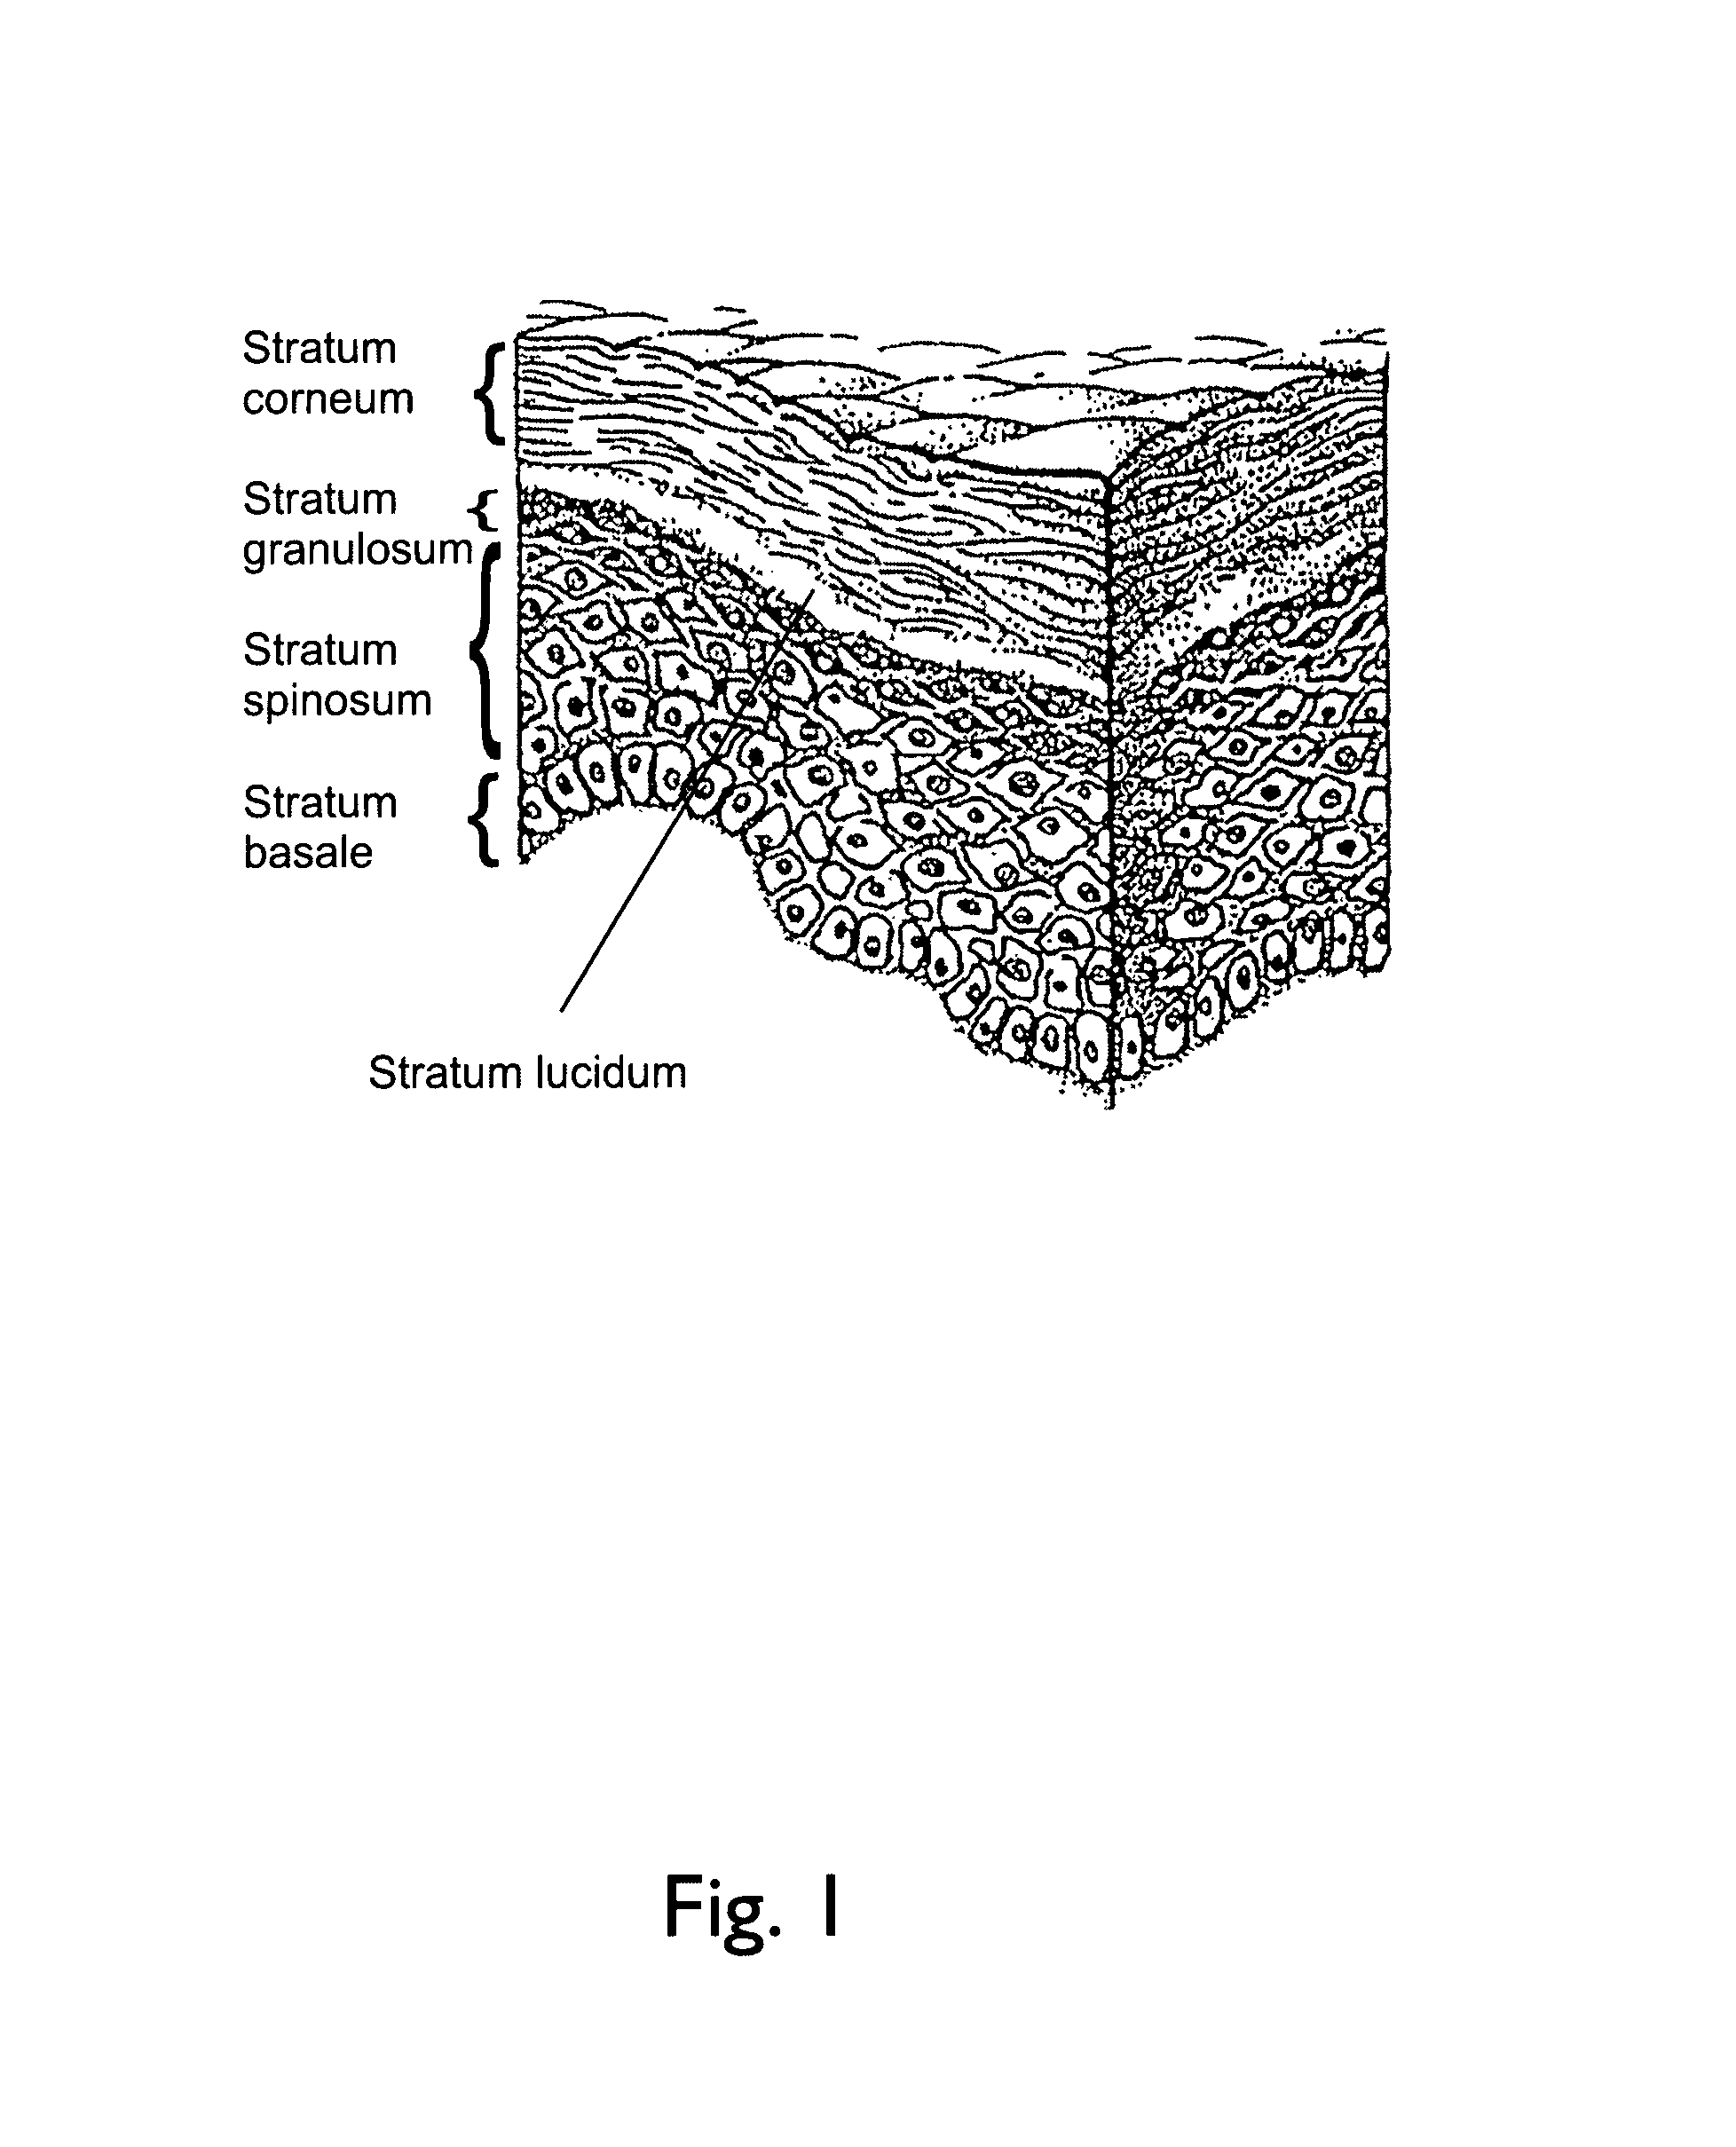 Physiological recording device or electrode